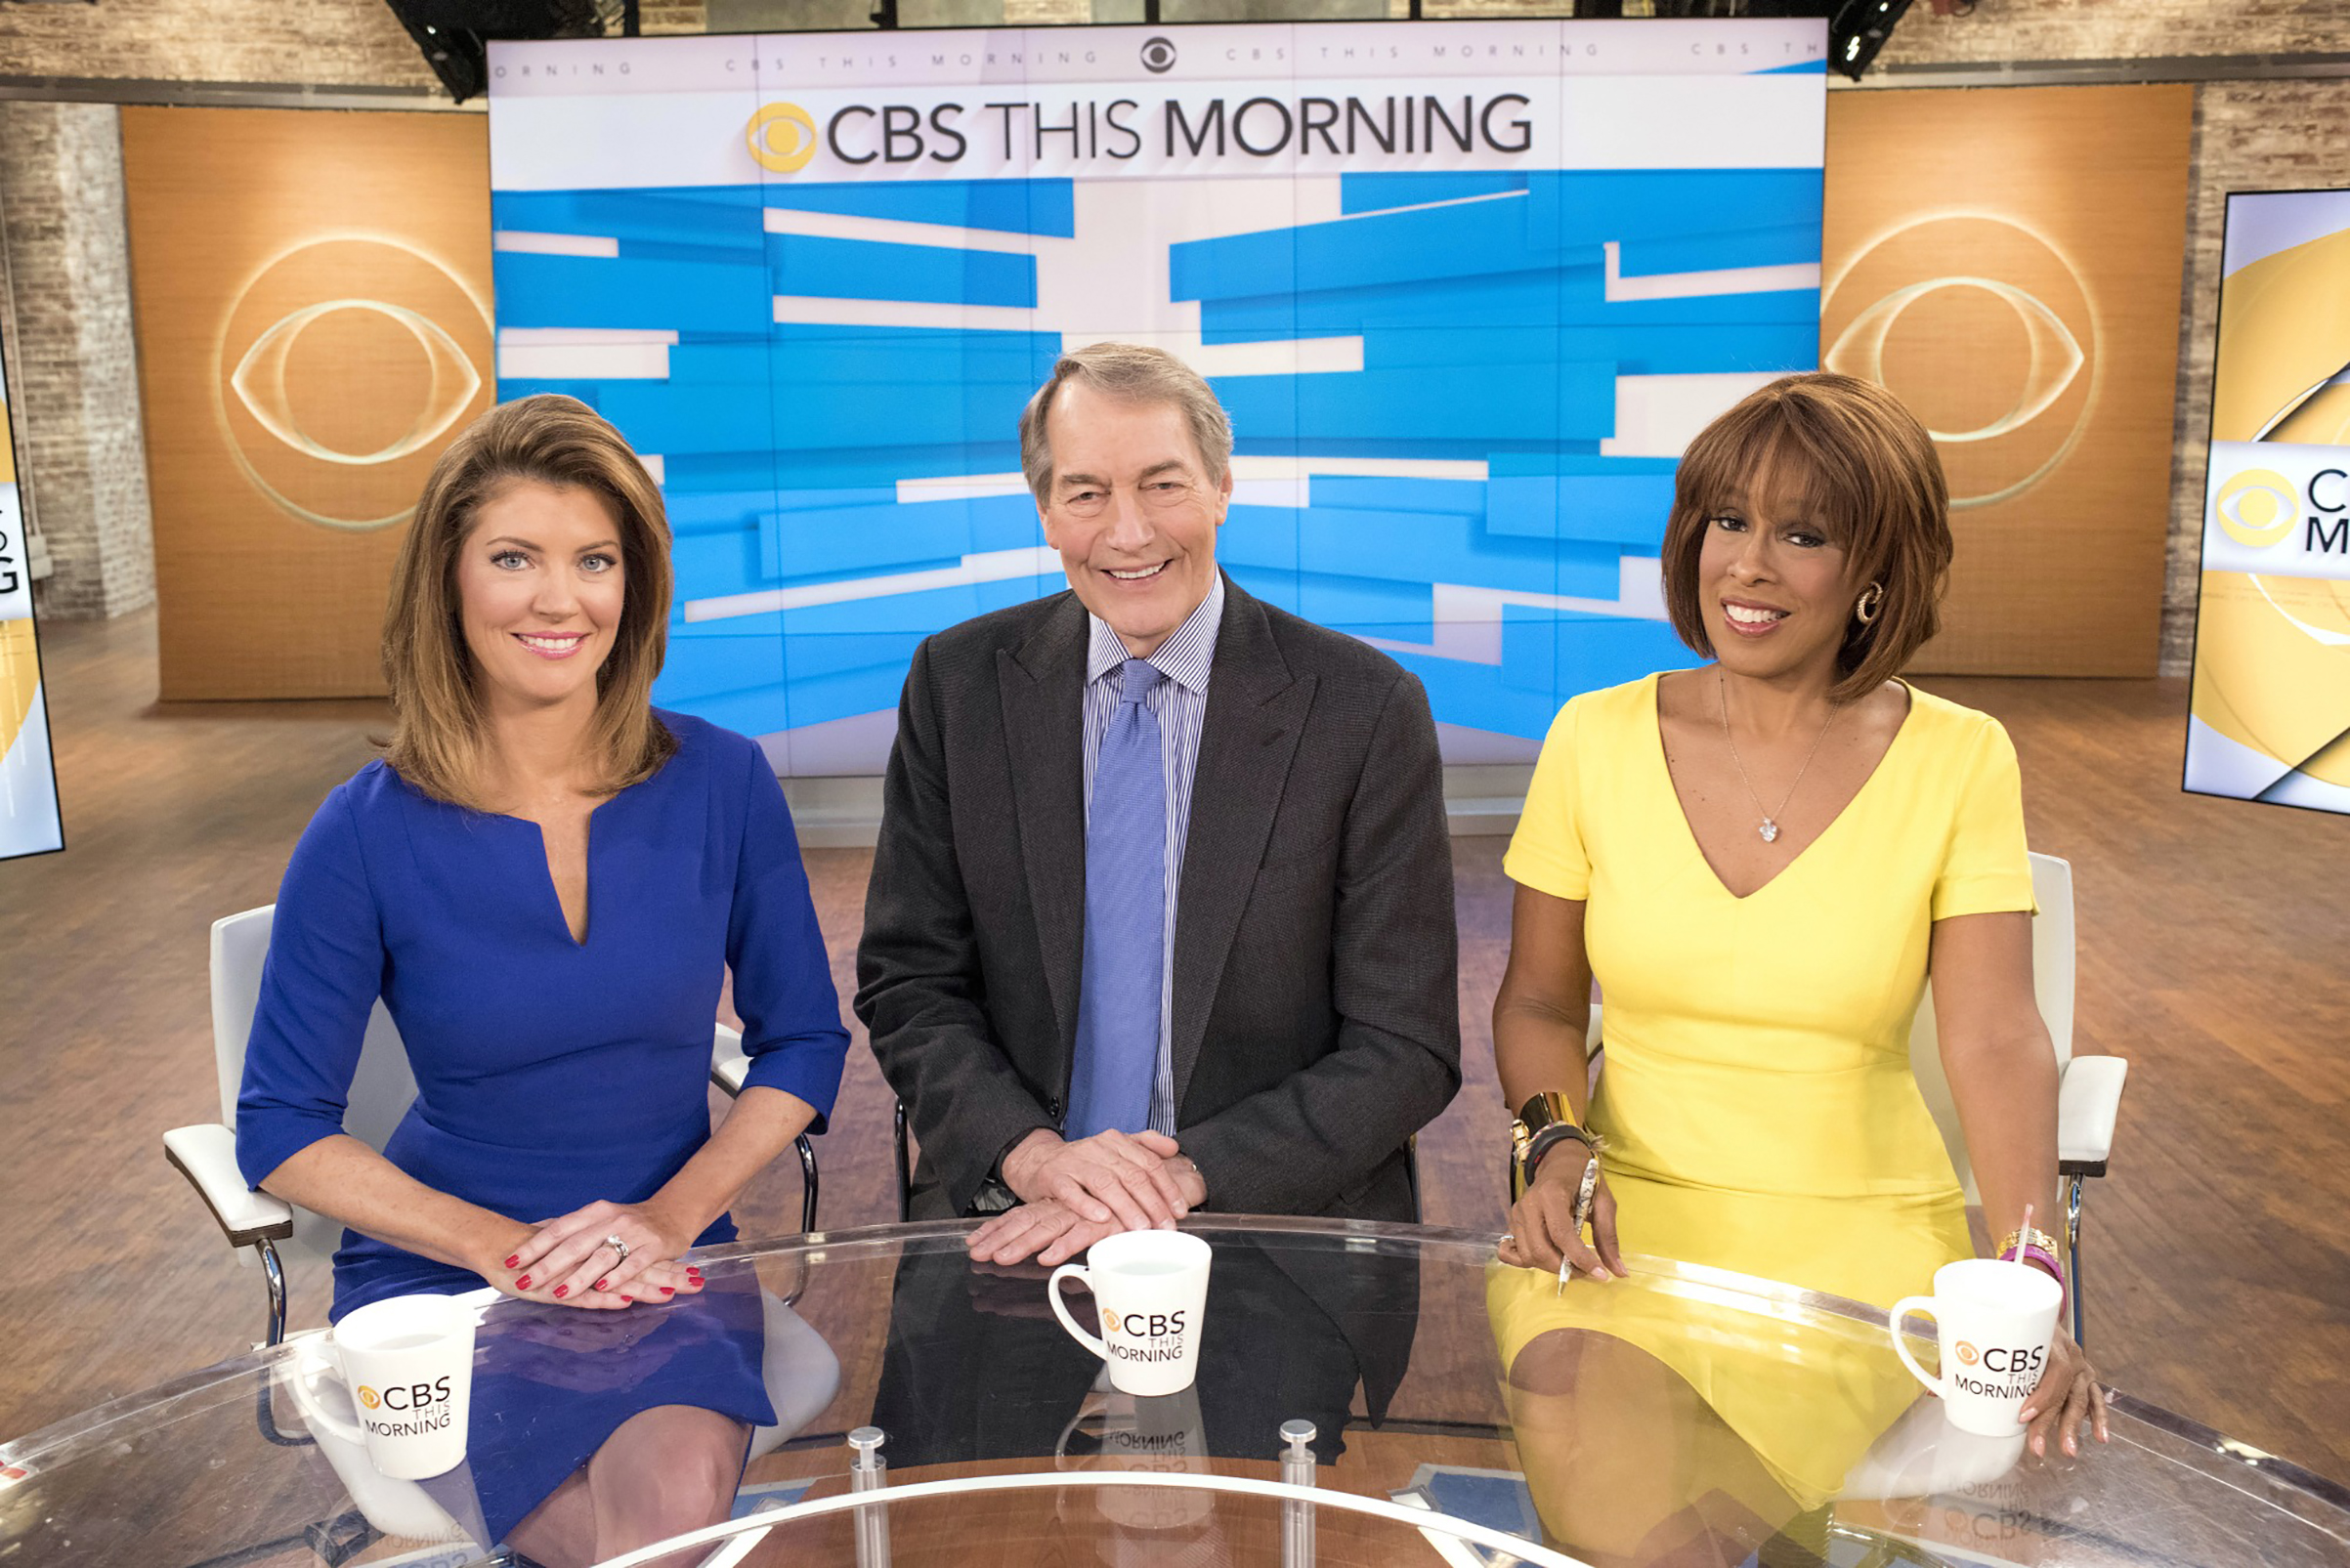 King with morning co-hosts Norah O’Donnell and Charlie Rose at CBS in 2016 (John Paul Filo—CBS/Getty Images)